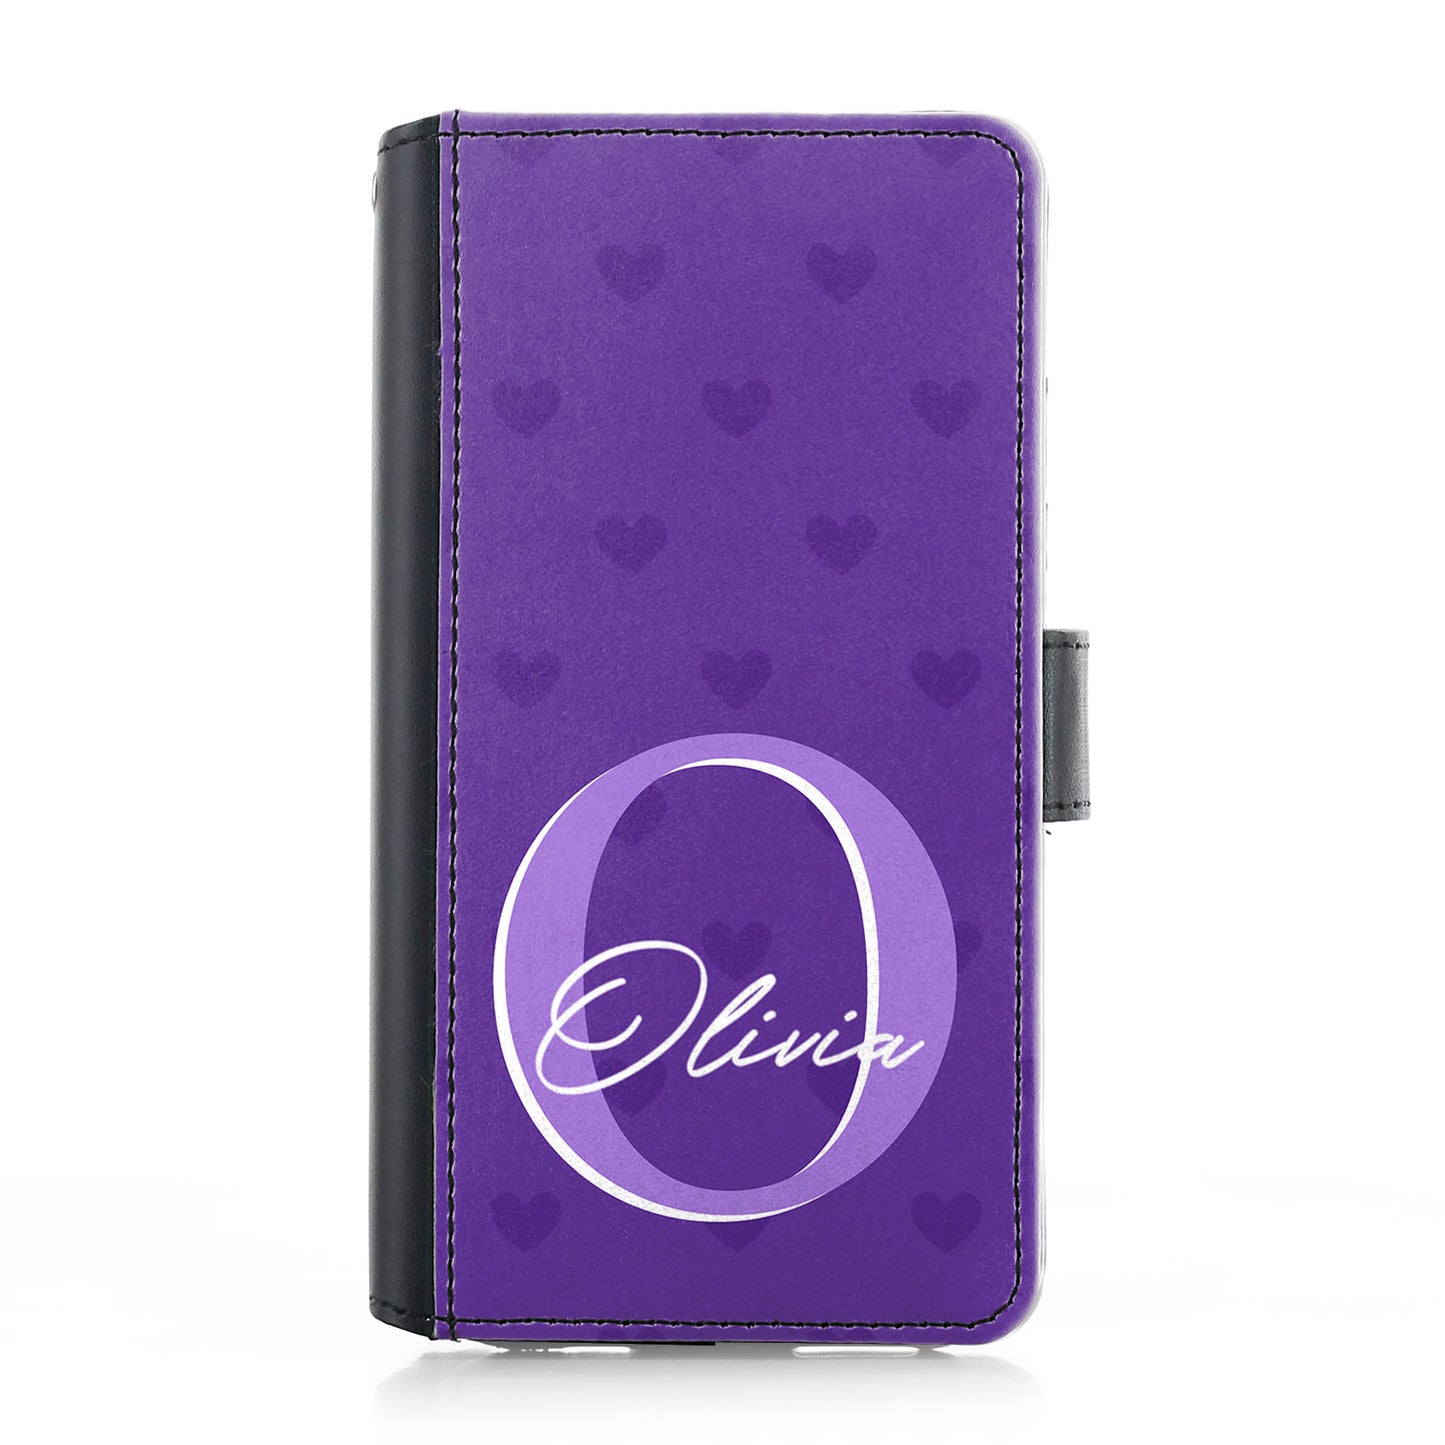 Personalised iPhone Leather Case - Purple Heart Monogram and Name